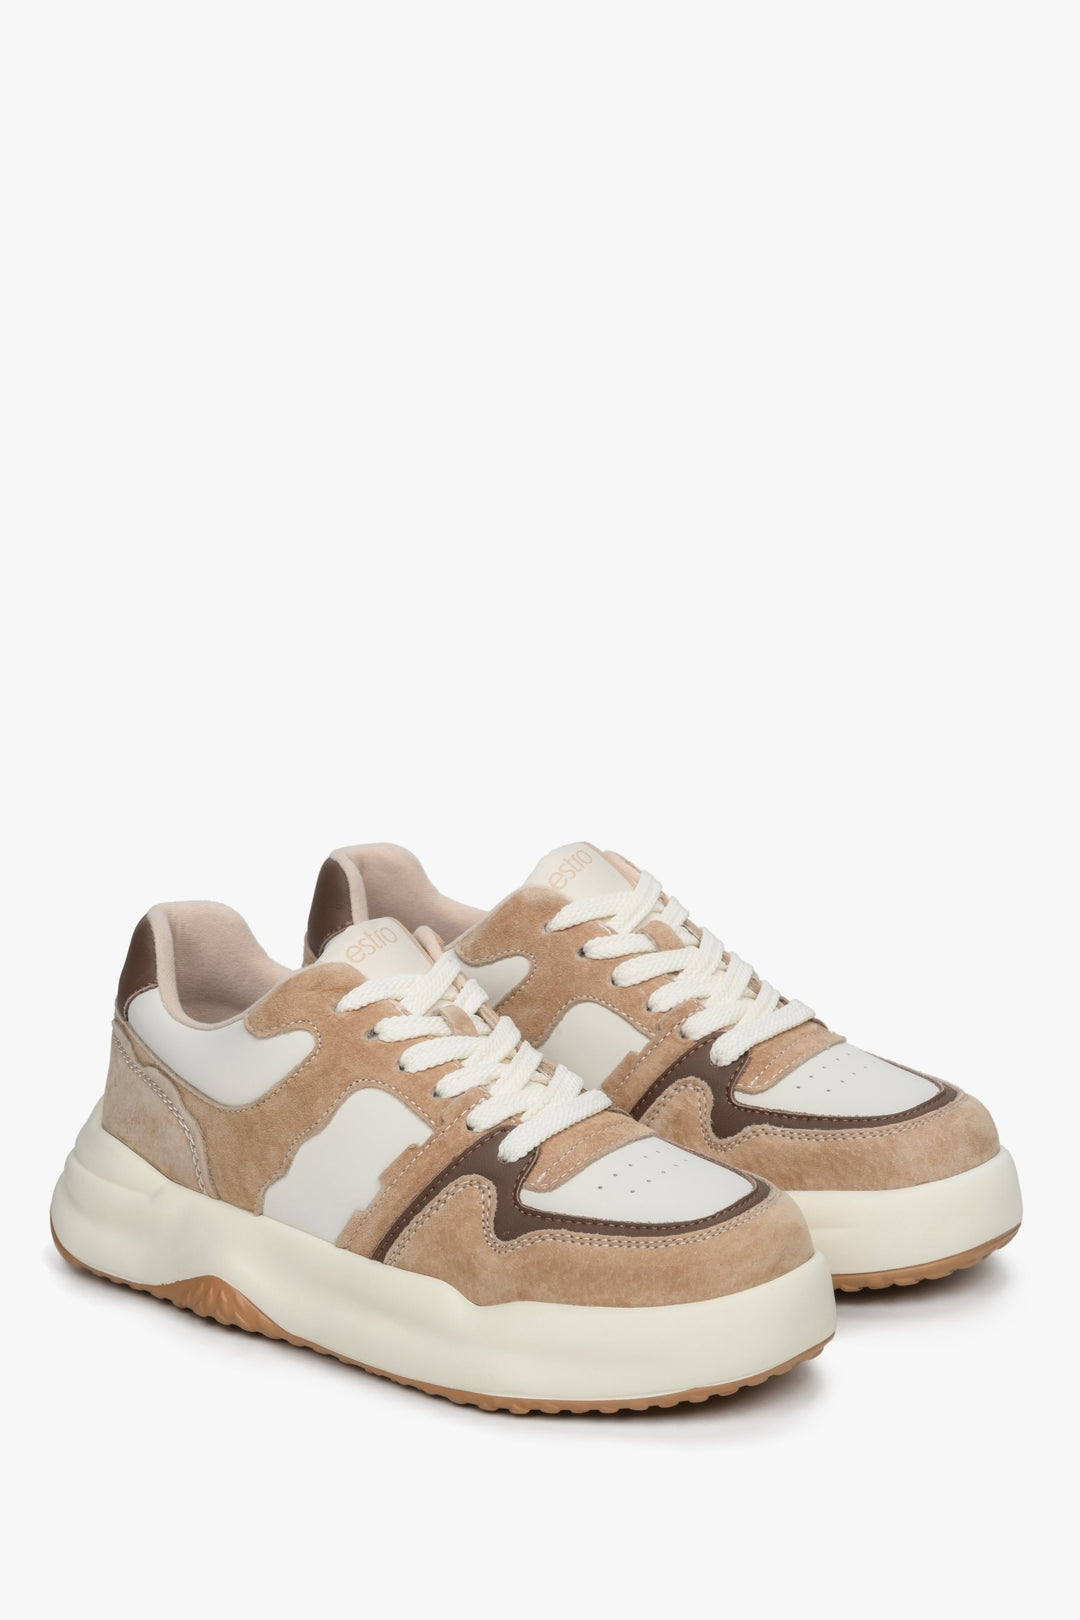 Women's casual sneakers in beige and white Estro - presentation of a shoe toe and sideline.